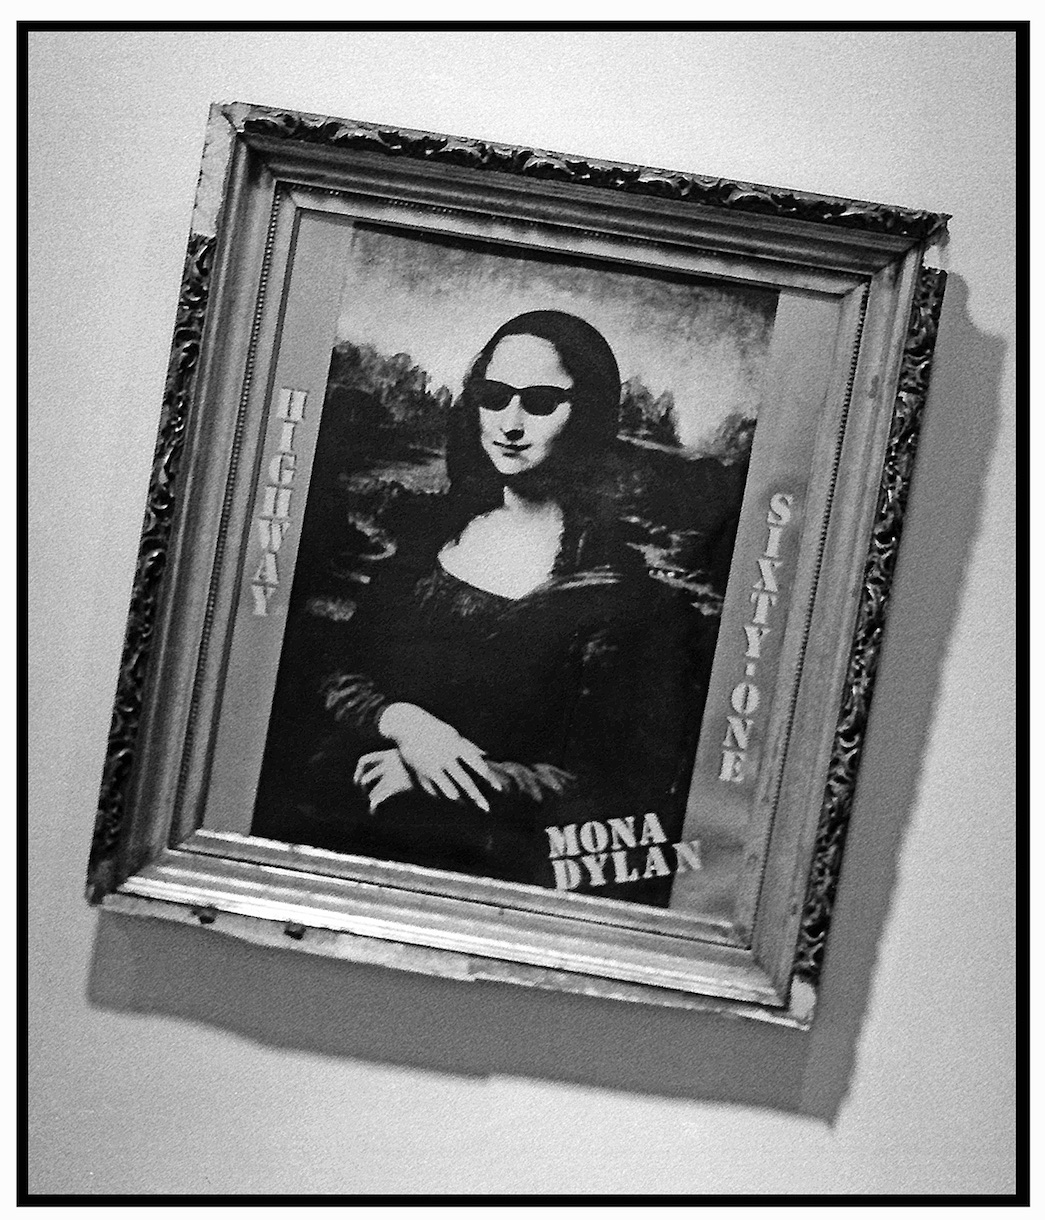 A black and white photograph of a framed and tilted version of Mona Lisa with sunglasses and the text 